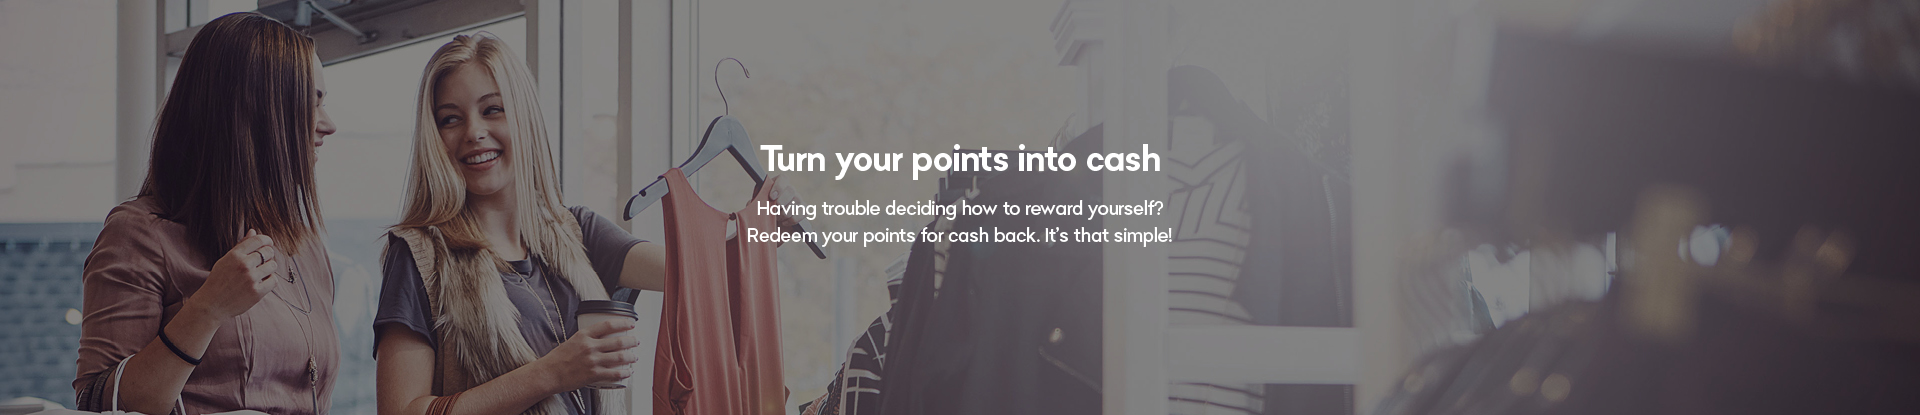 Turn your points into cash